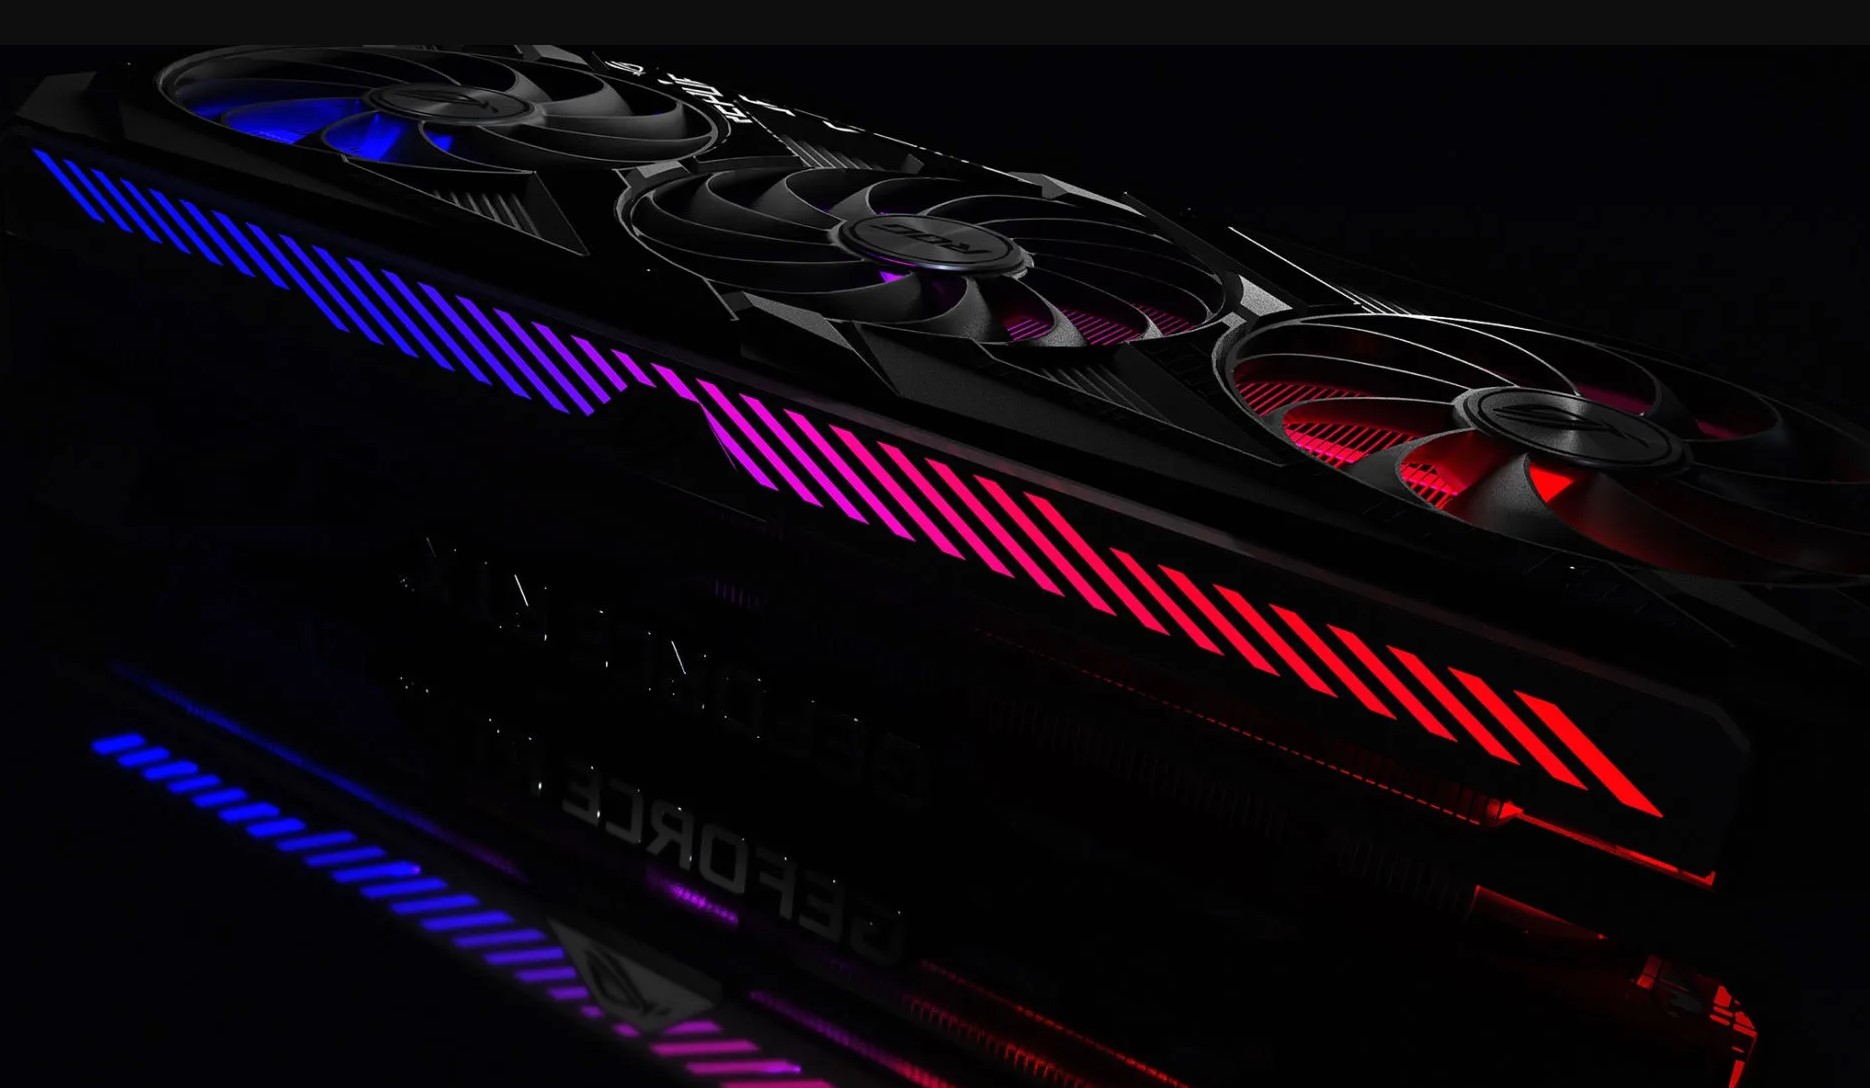  Asus made its new ROG Strix cards 400W behemoths to give Nvidia Ampere room to breathe 